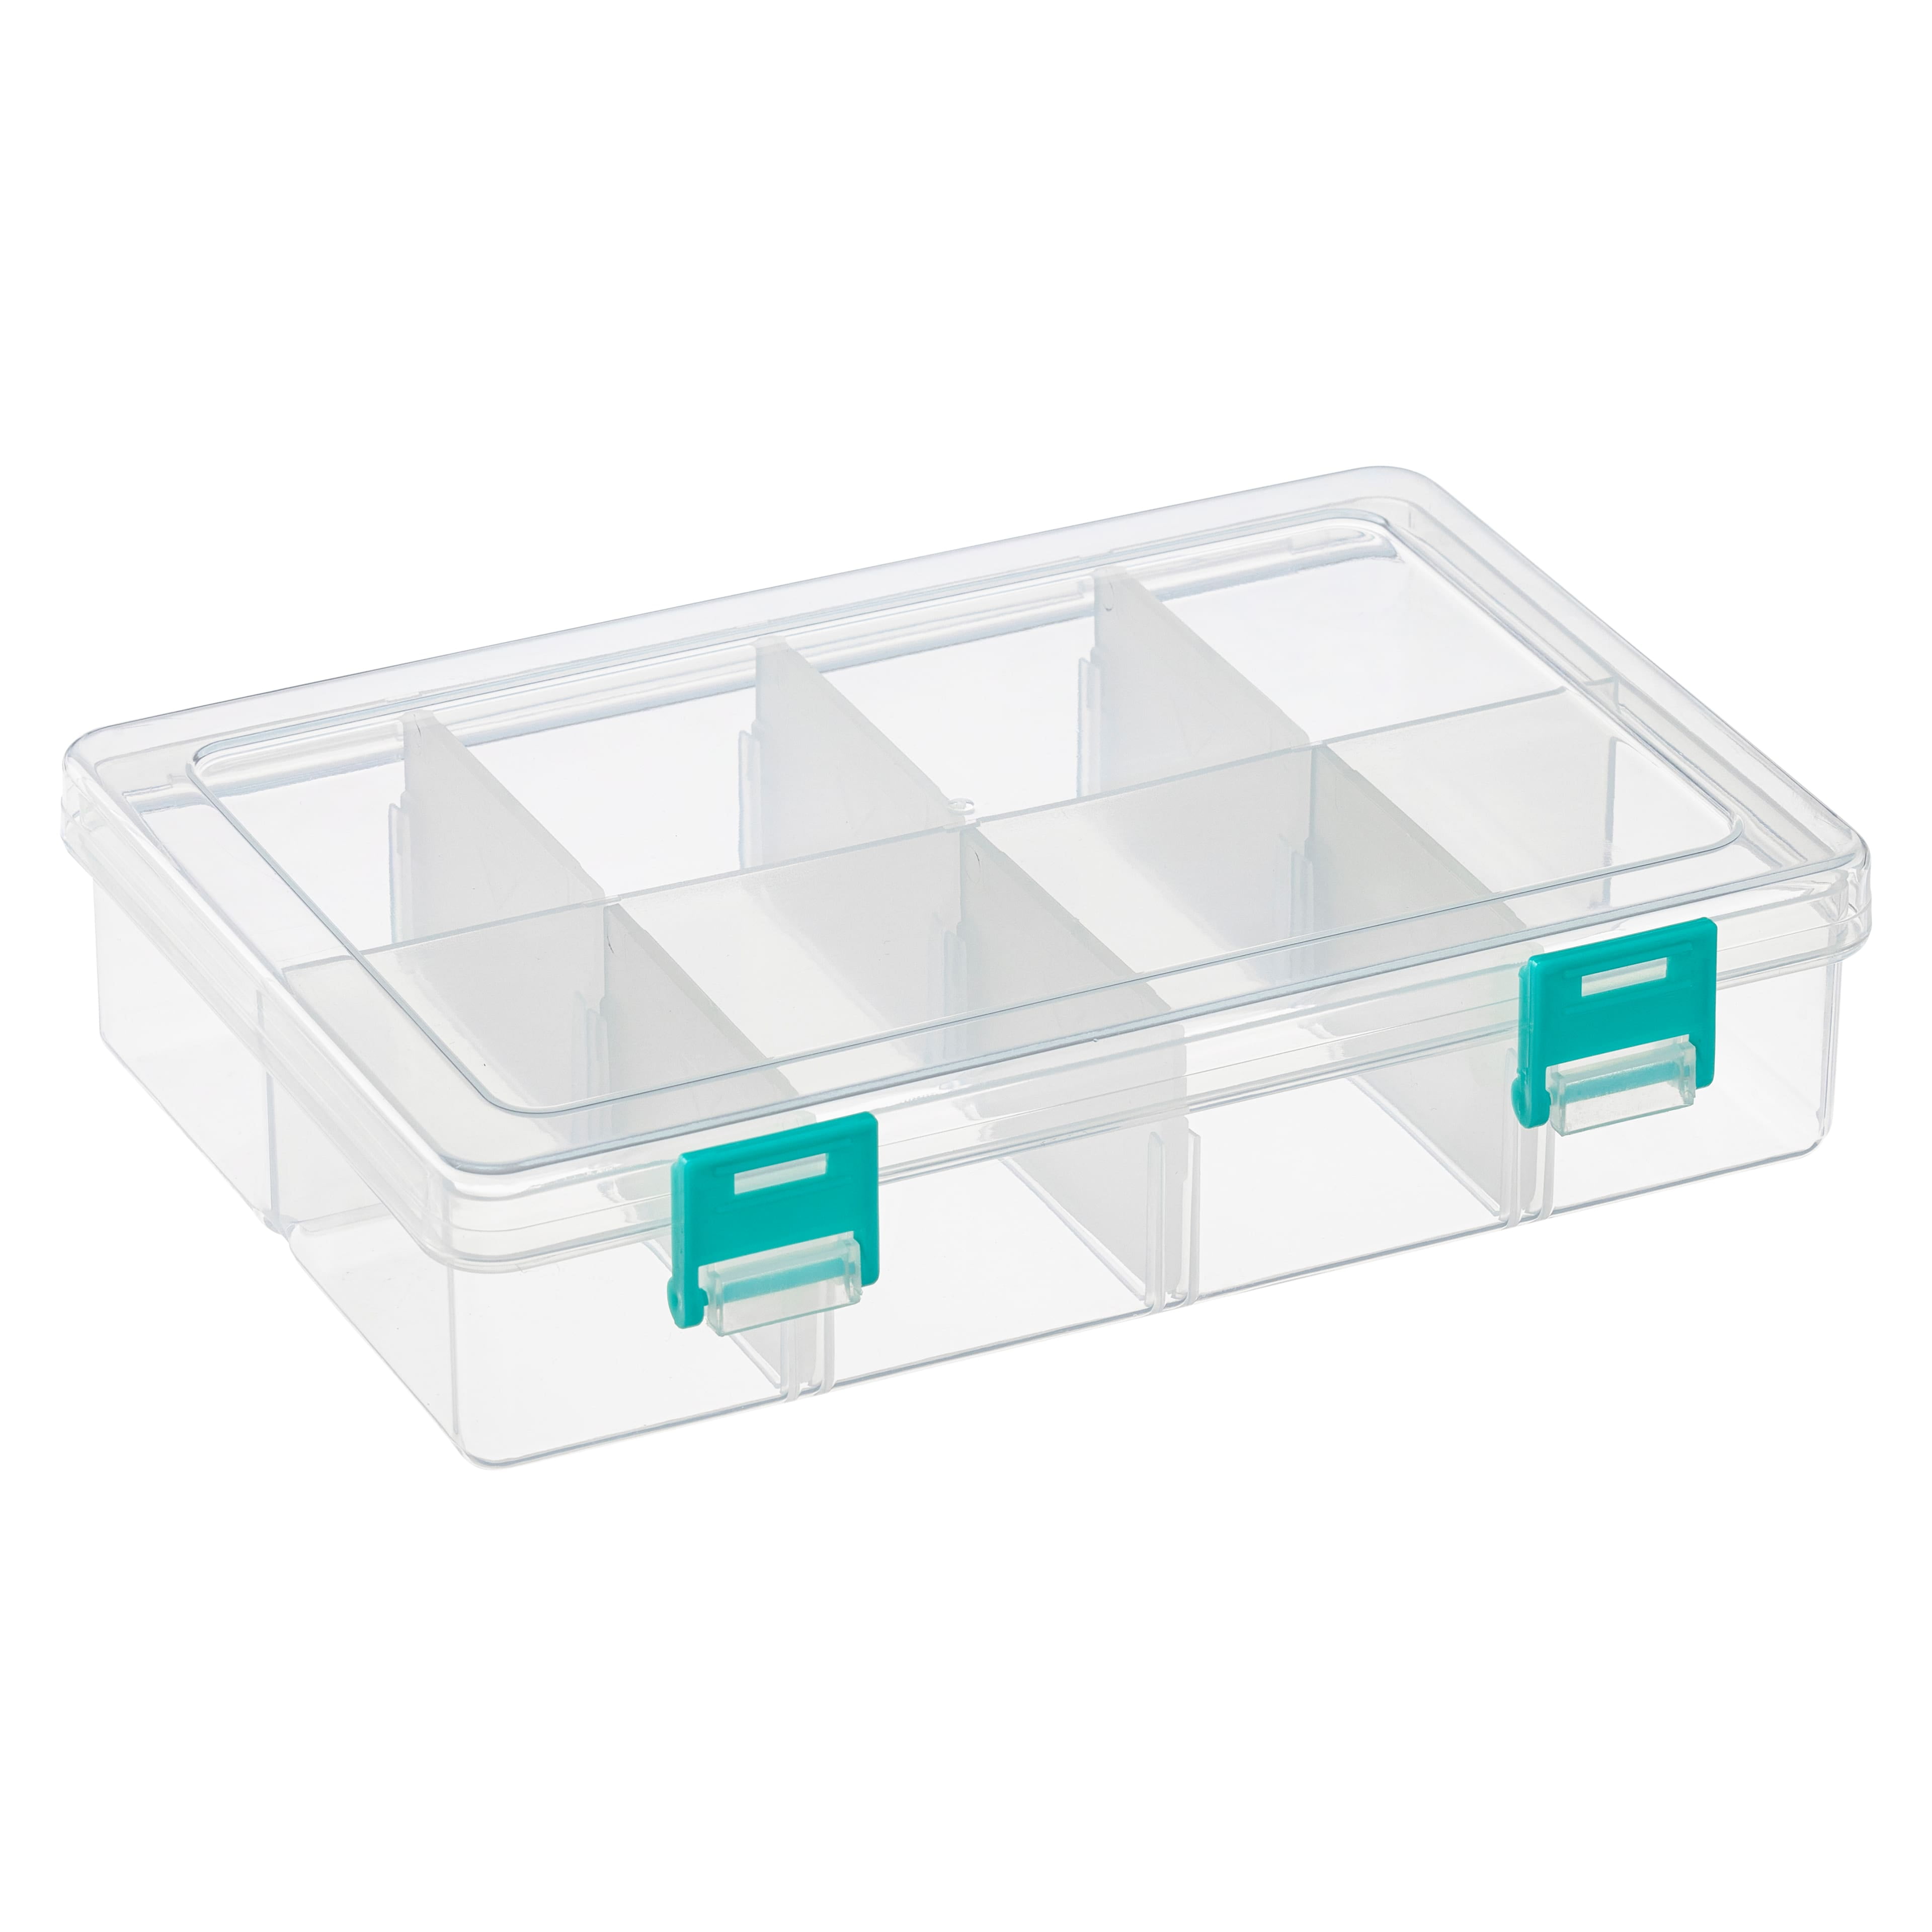 6 Pack: Clear & Turquoise 8-Compartment Storage Box by Bead Landing™